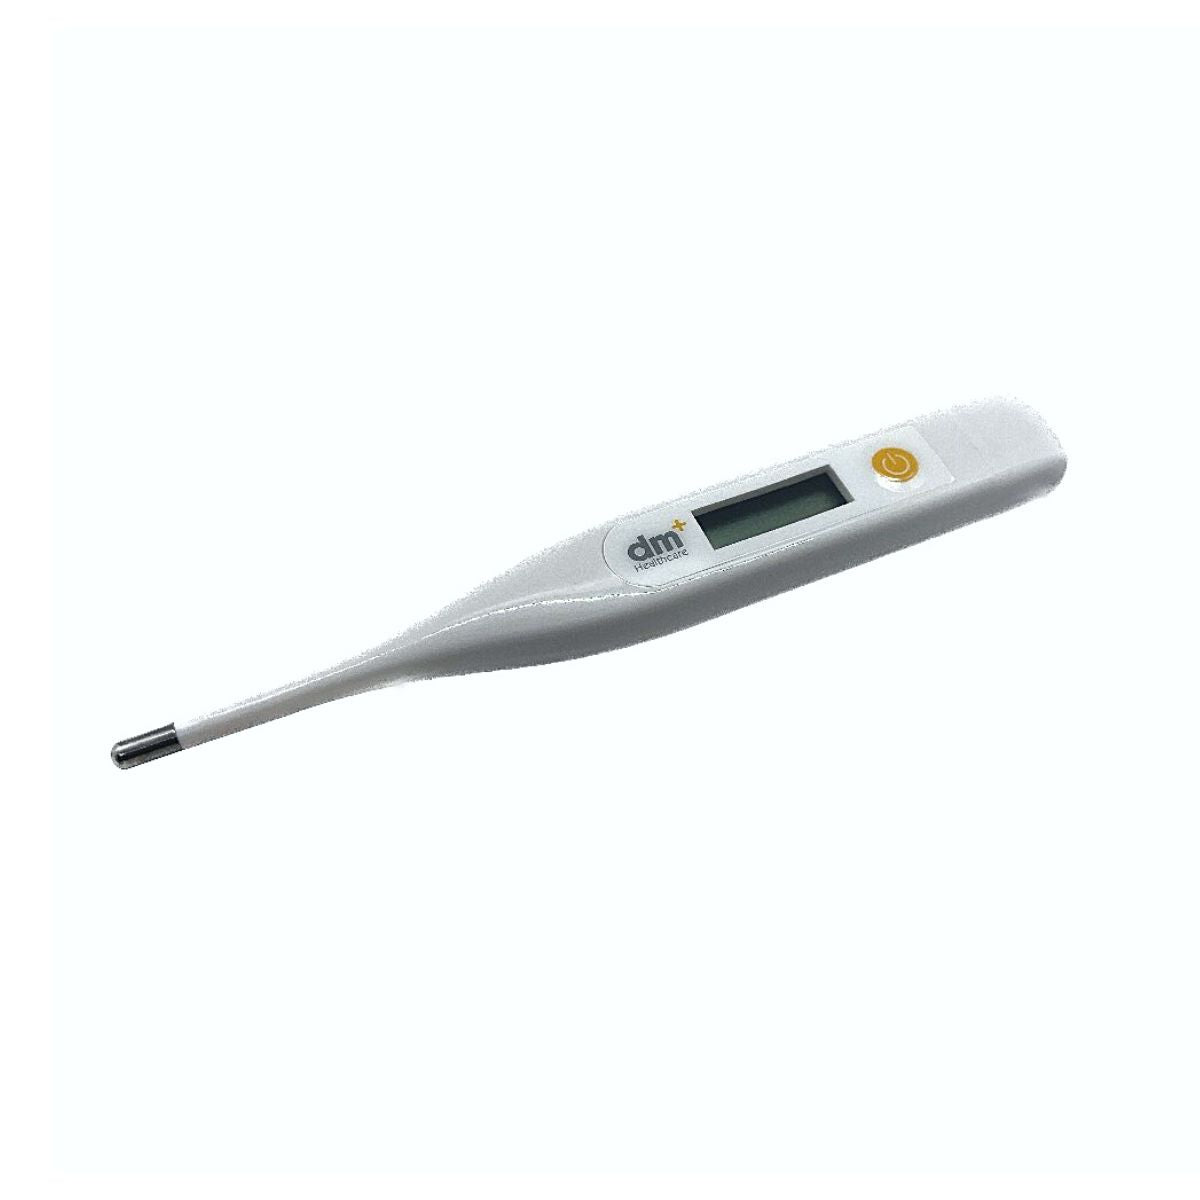 [DuoMed] Digital Thermometer